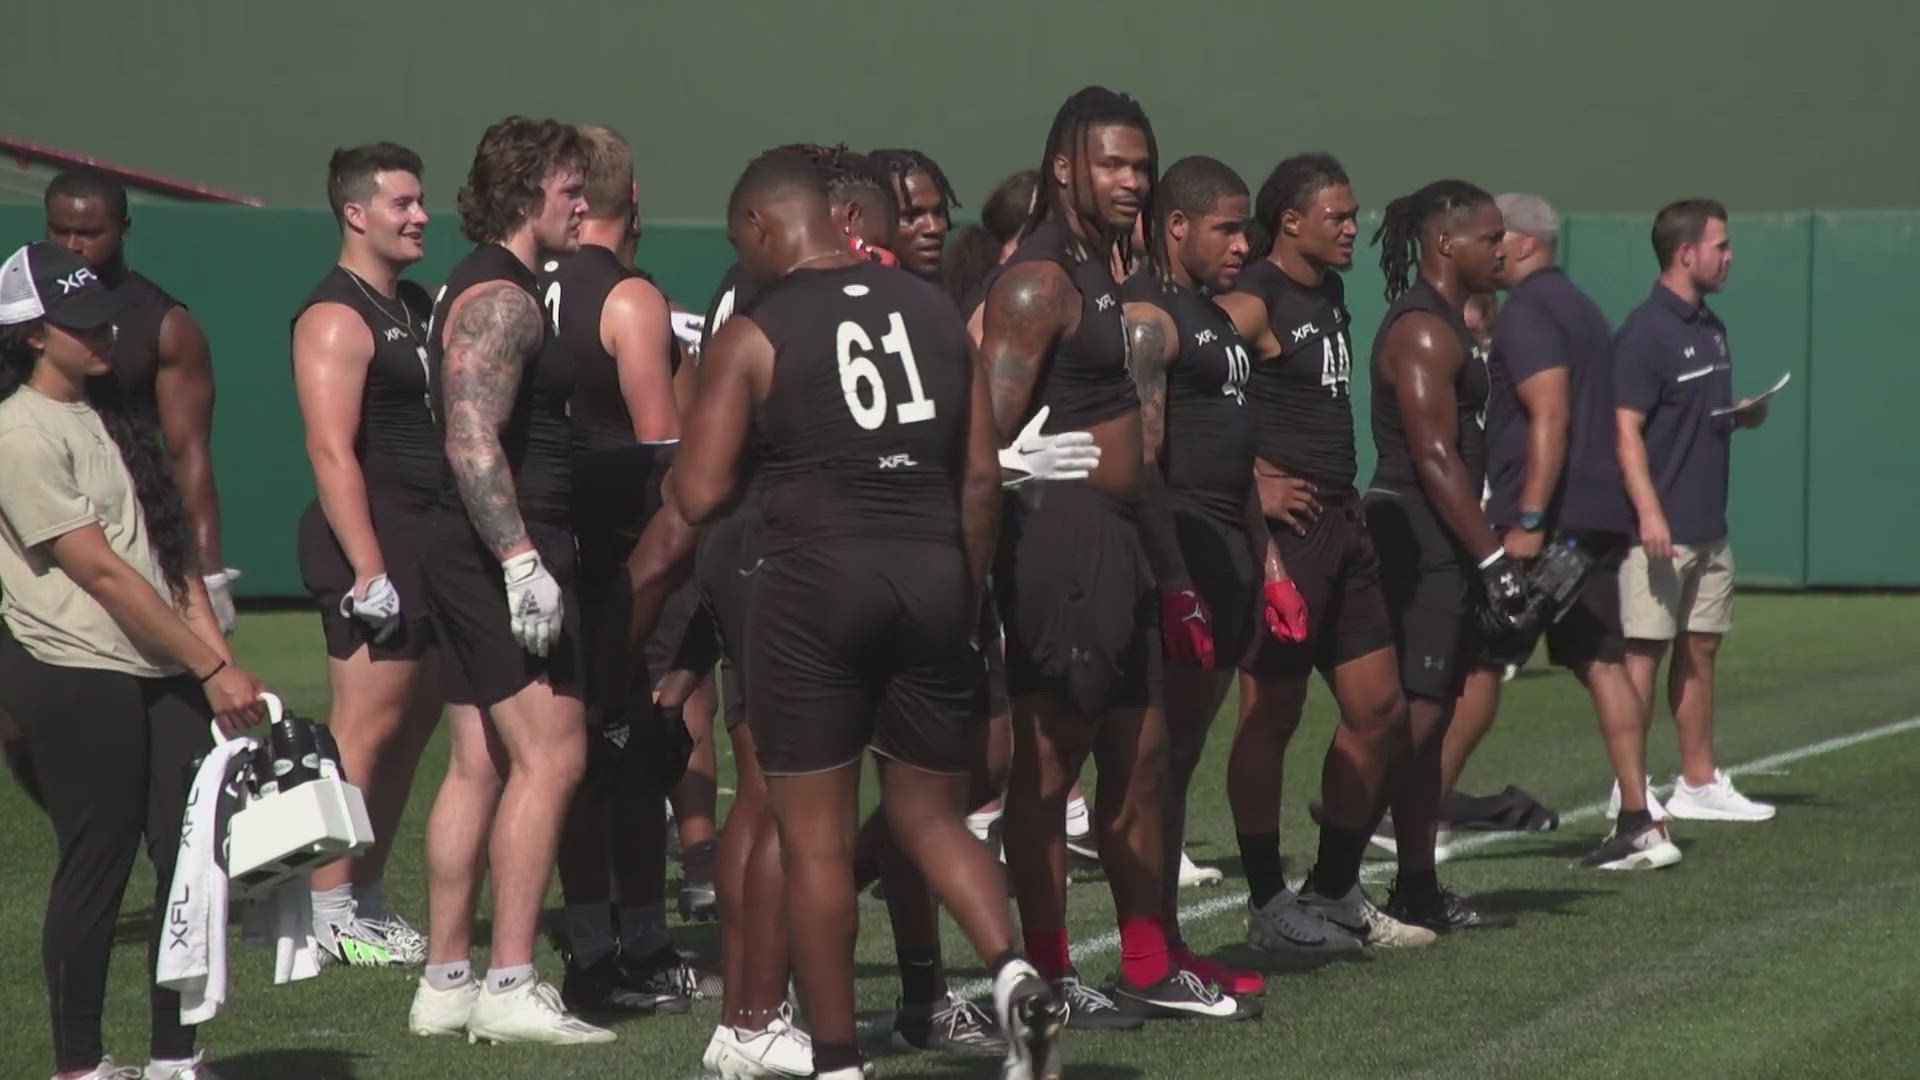 200 players tried out for spots on XFL rosters, doing lifts and tests not found at the NFL's combine.